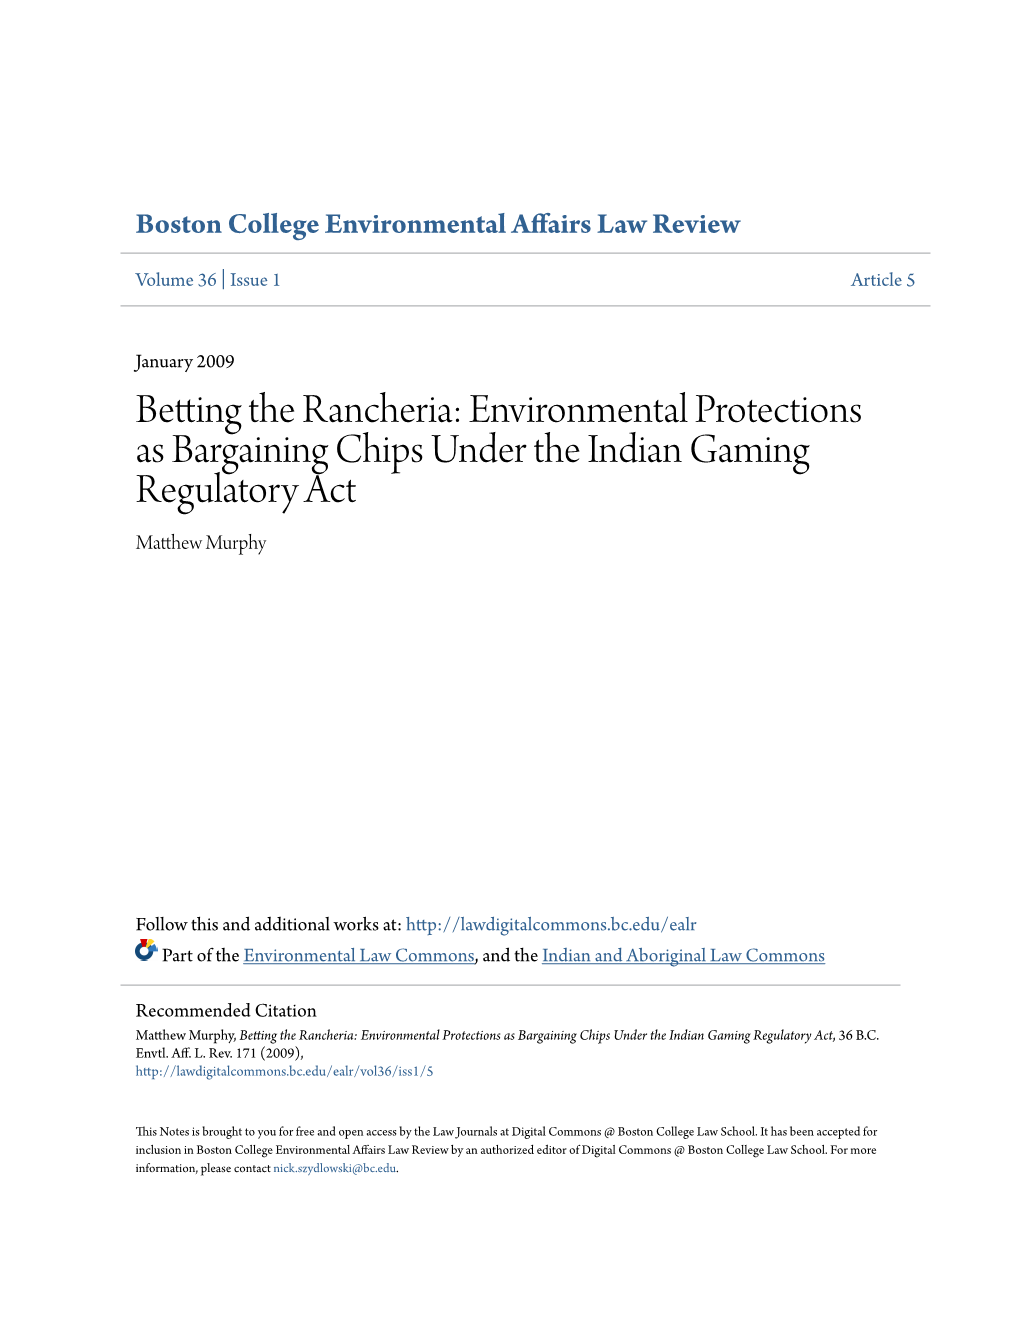 Betting the Rancheria: Environmental Protections As Bargaining Chips Under the Indian Gaming Regulatory Act Matthew Urm Phy